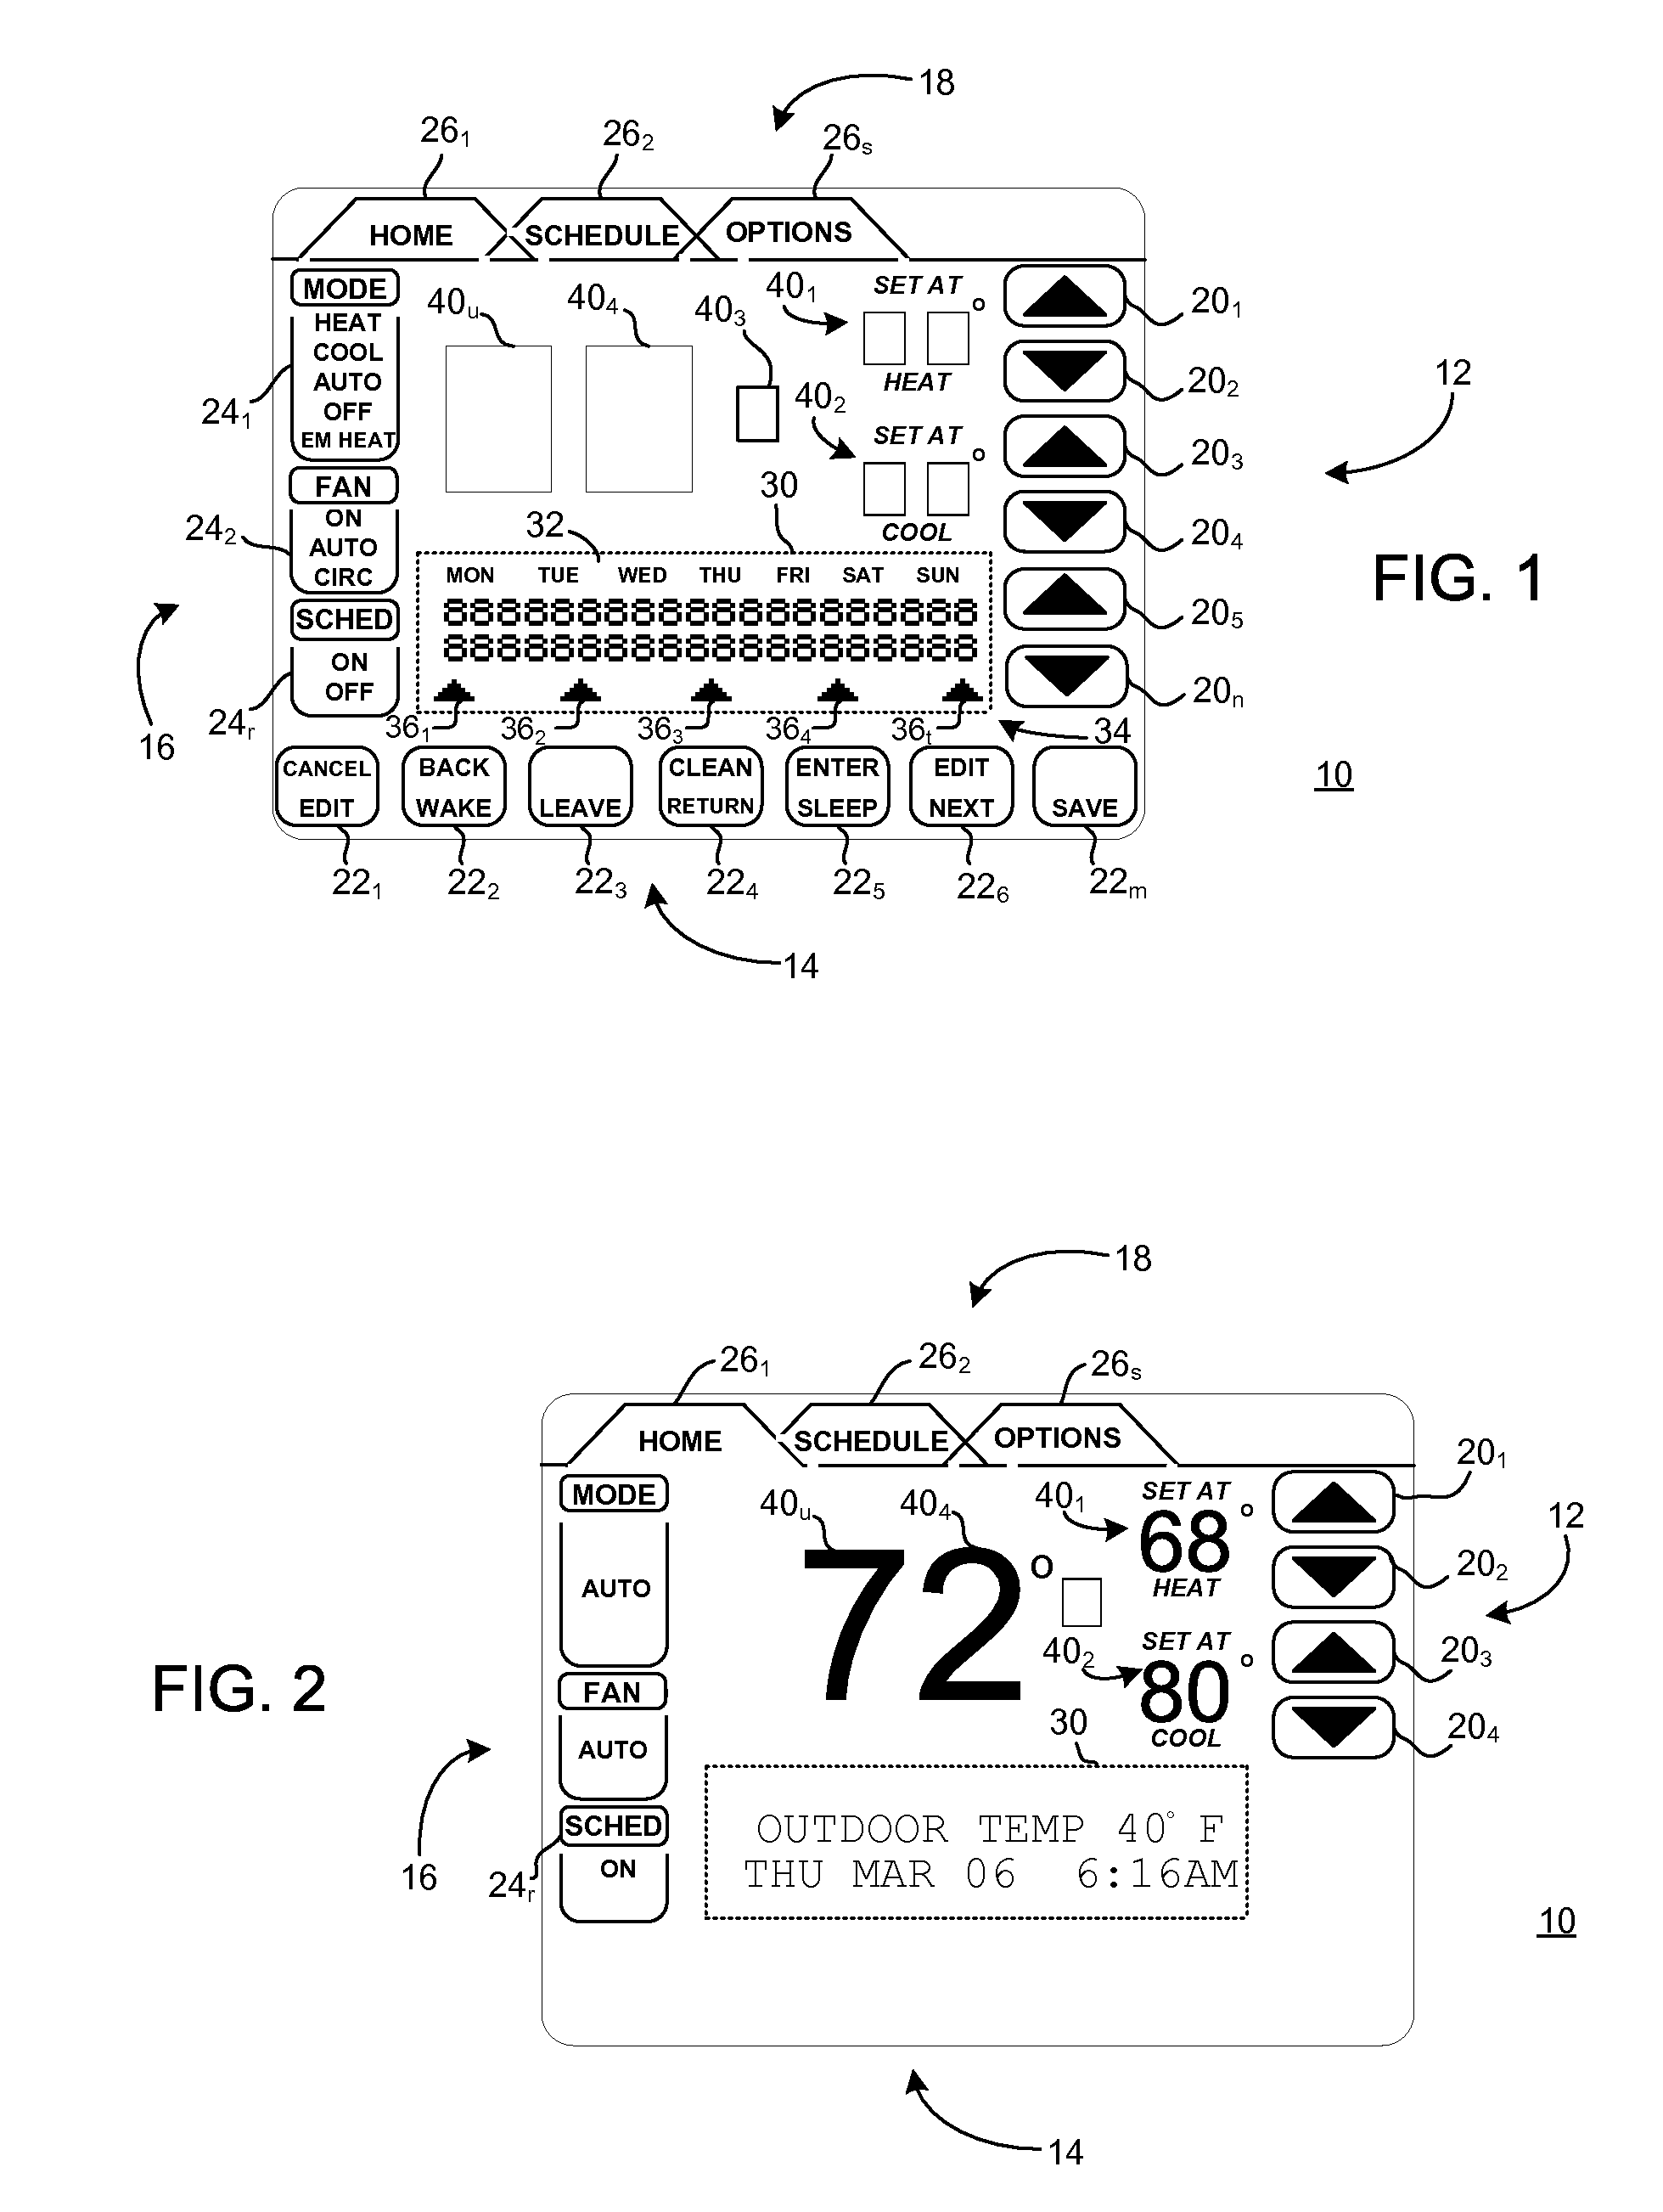 Display apparatus and method for a control unit for an environmental control system